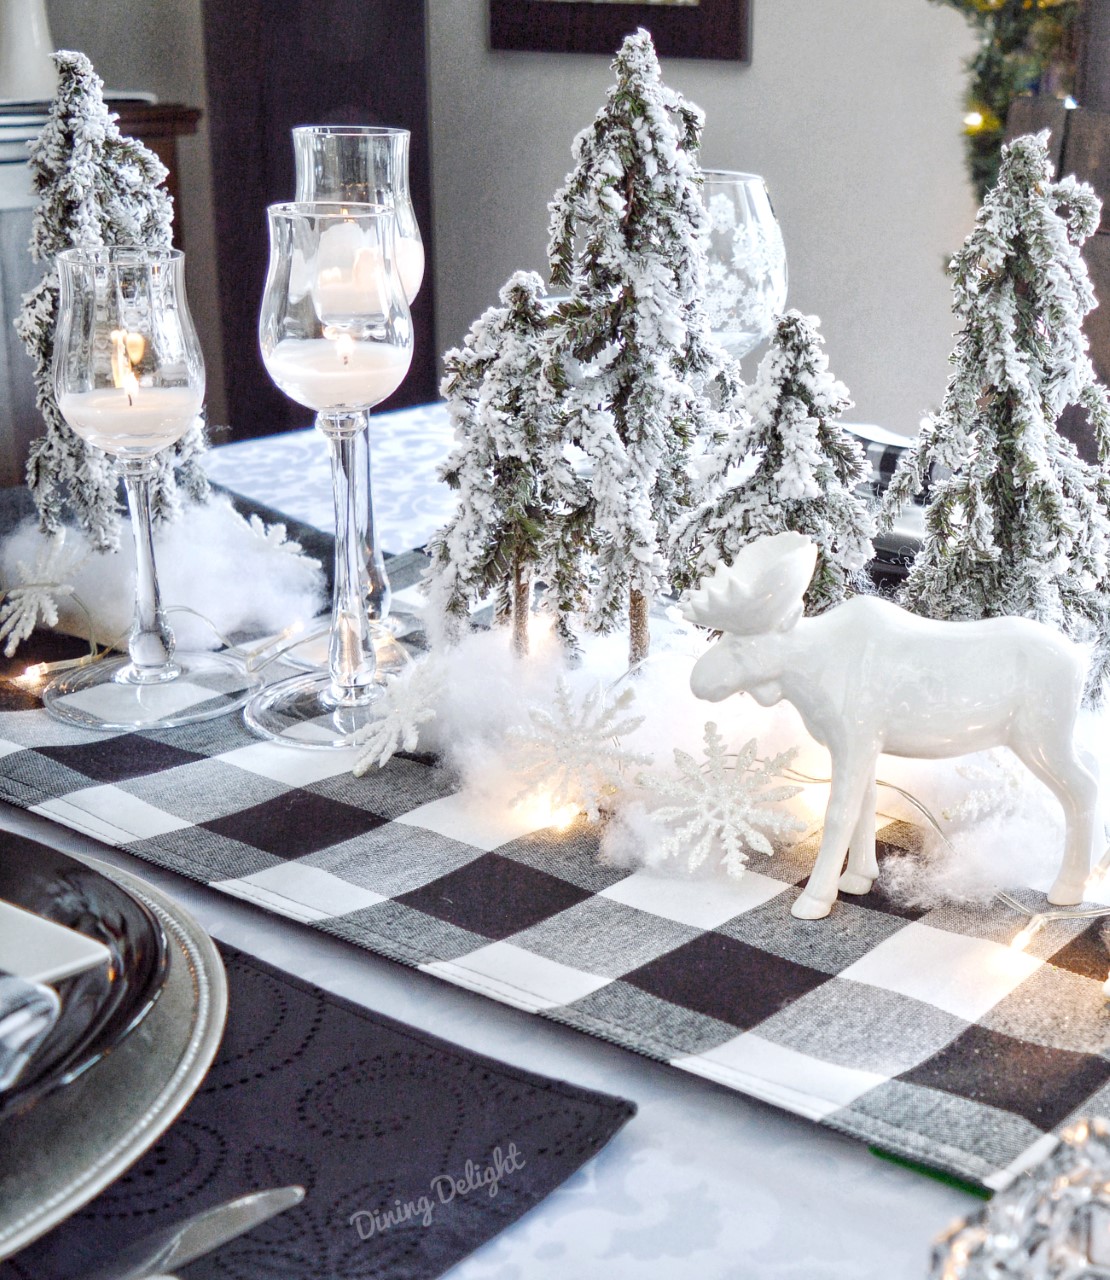 Dining Delight: Winter Blues Snowflake Tablescape